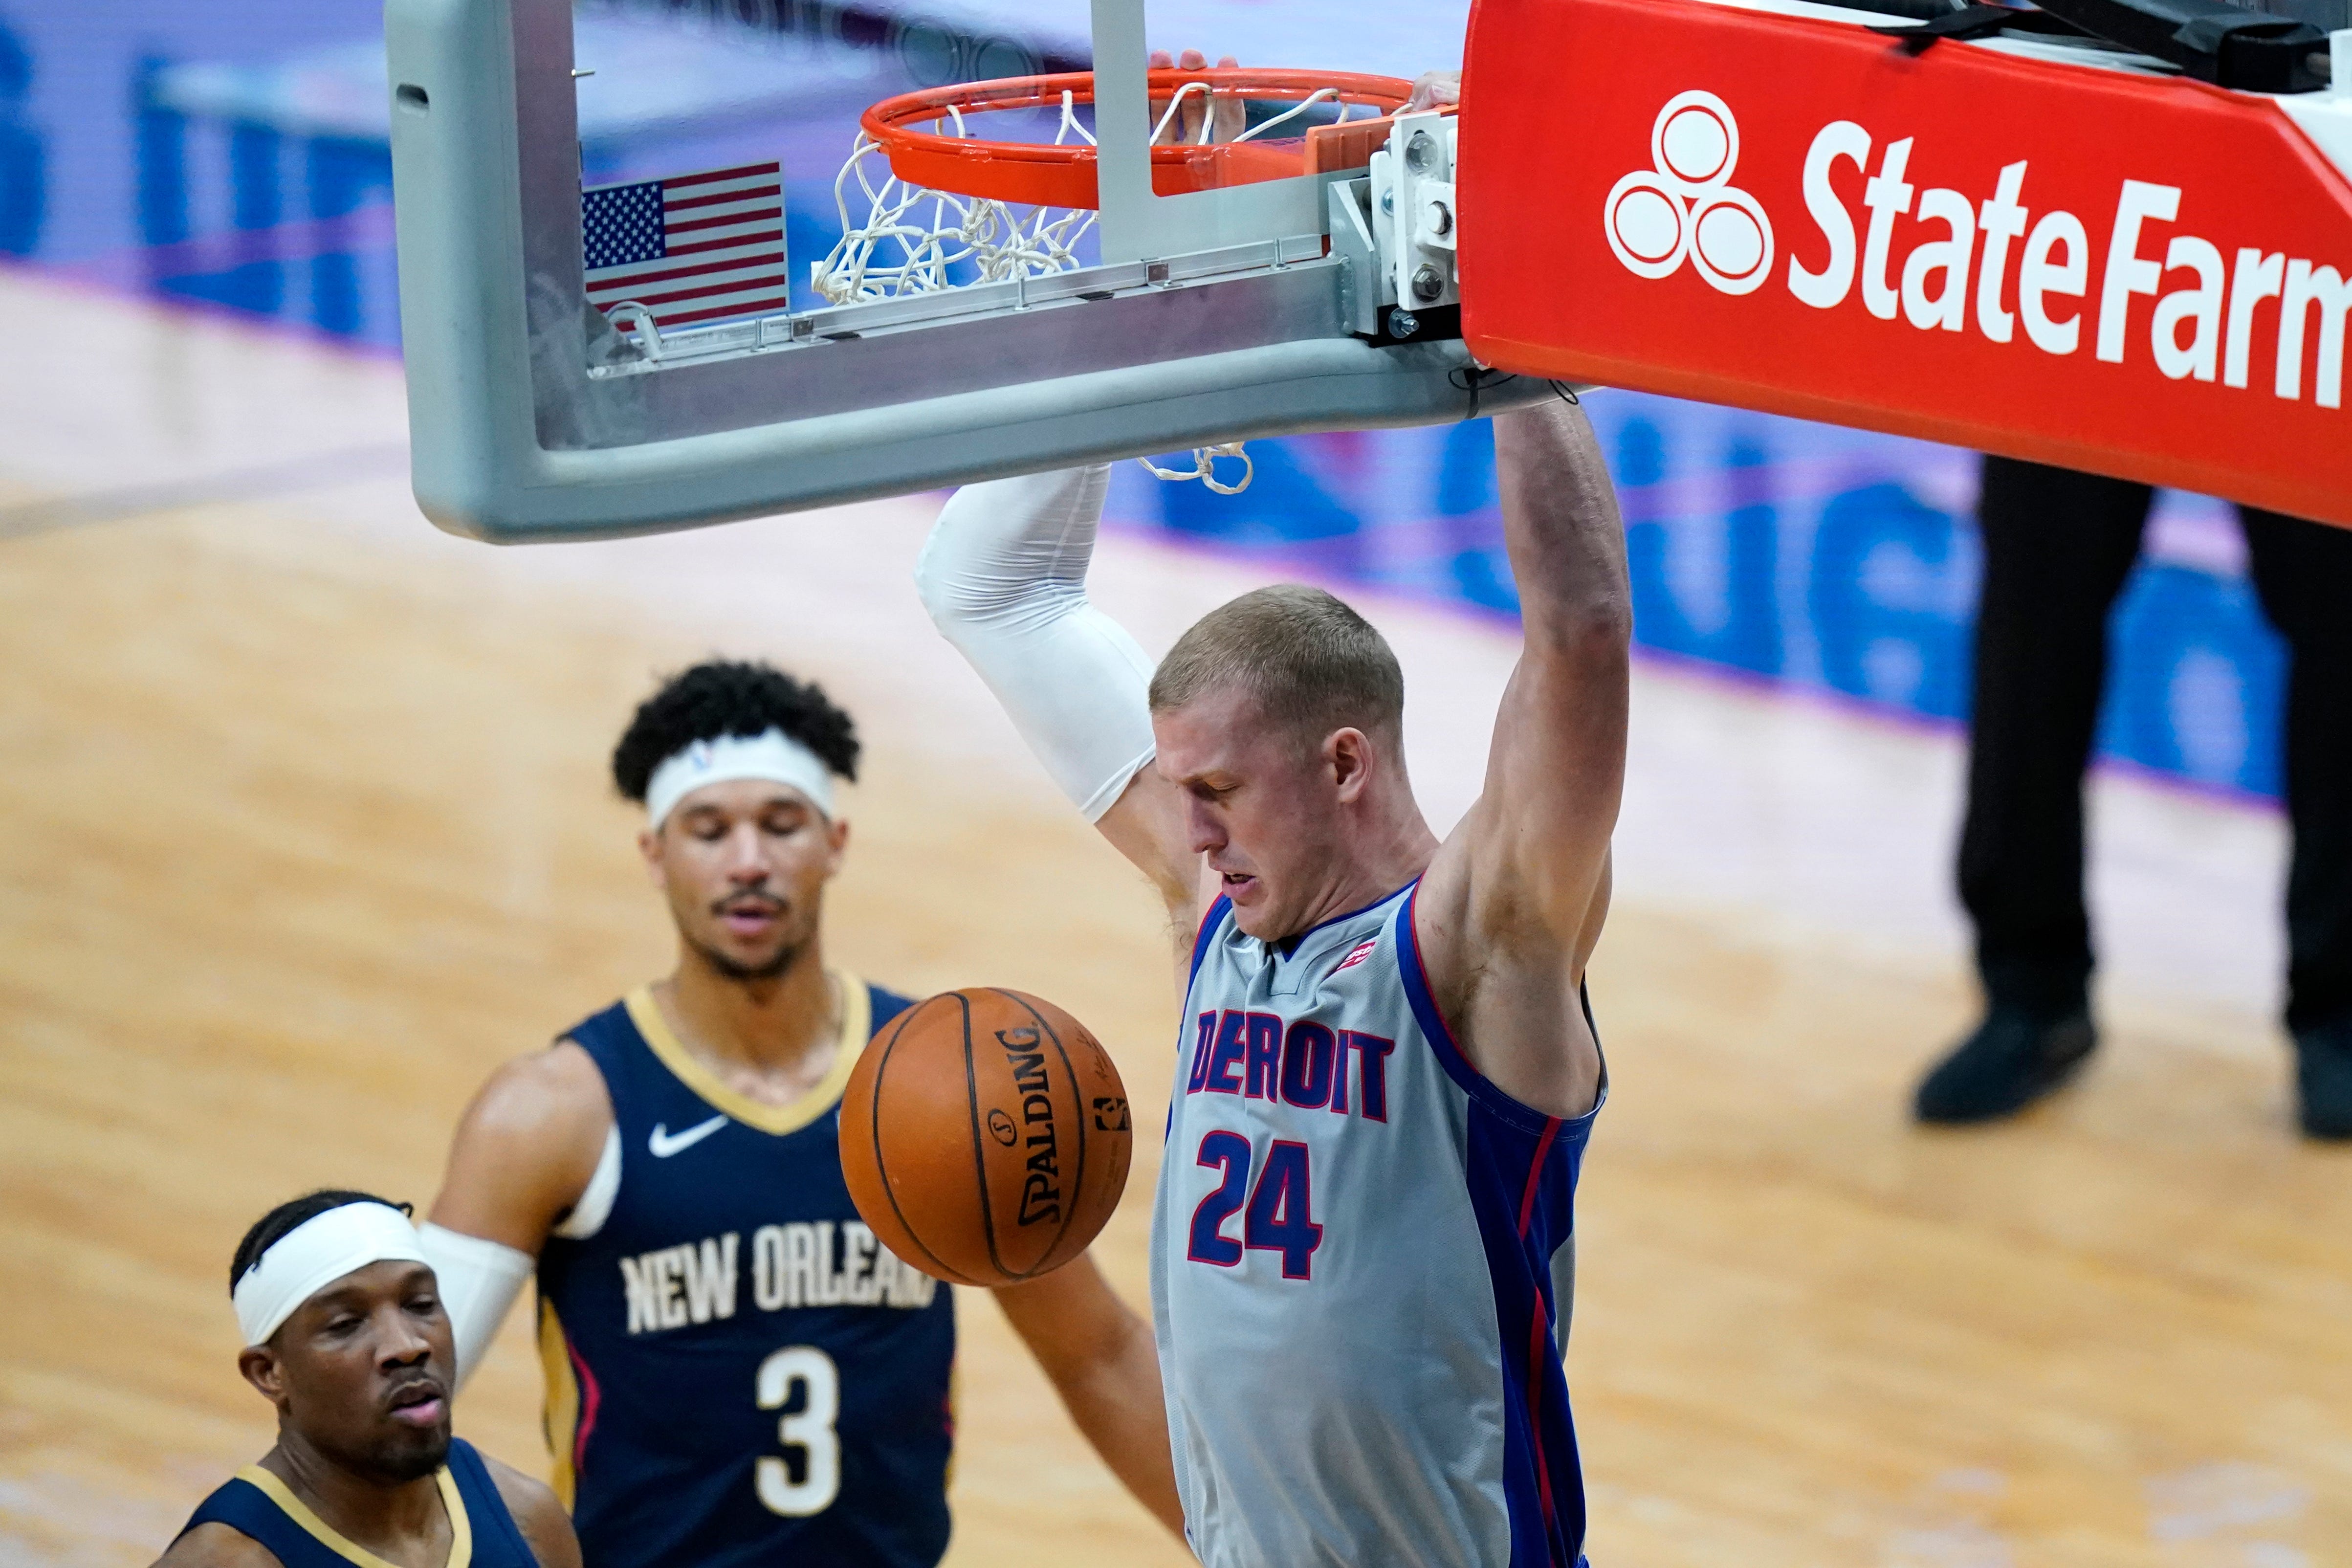 Detroit Pistons center Mason Plumlee (24) dunks next to New Orleans Pelicans guards Eric Bledsoe and Josh Hart (3) during the first half of an NBA basketball game in New Orleans, Wednesday, Feb. 24, 2021.